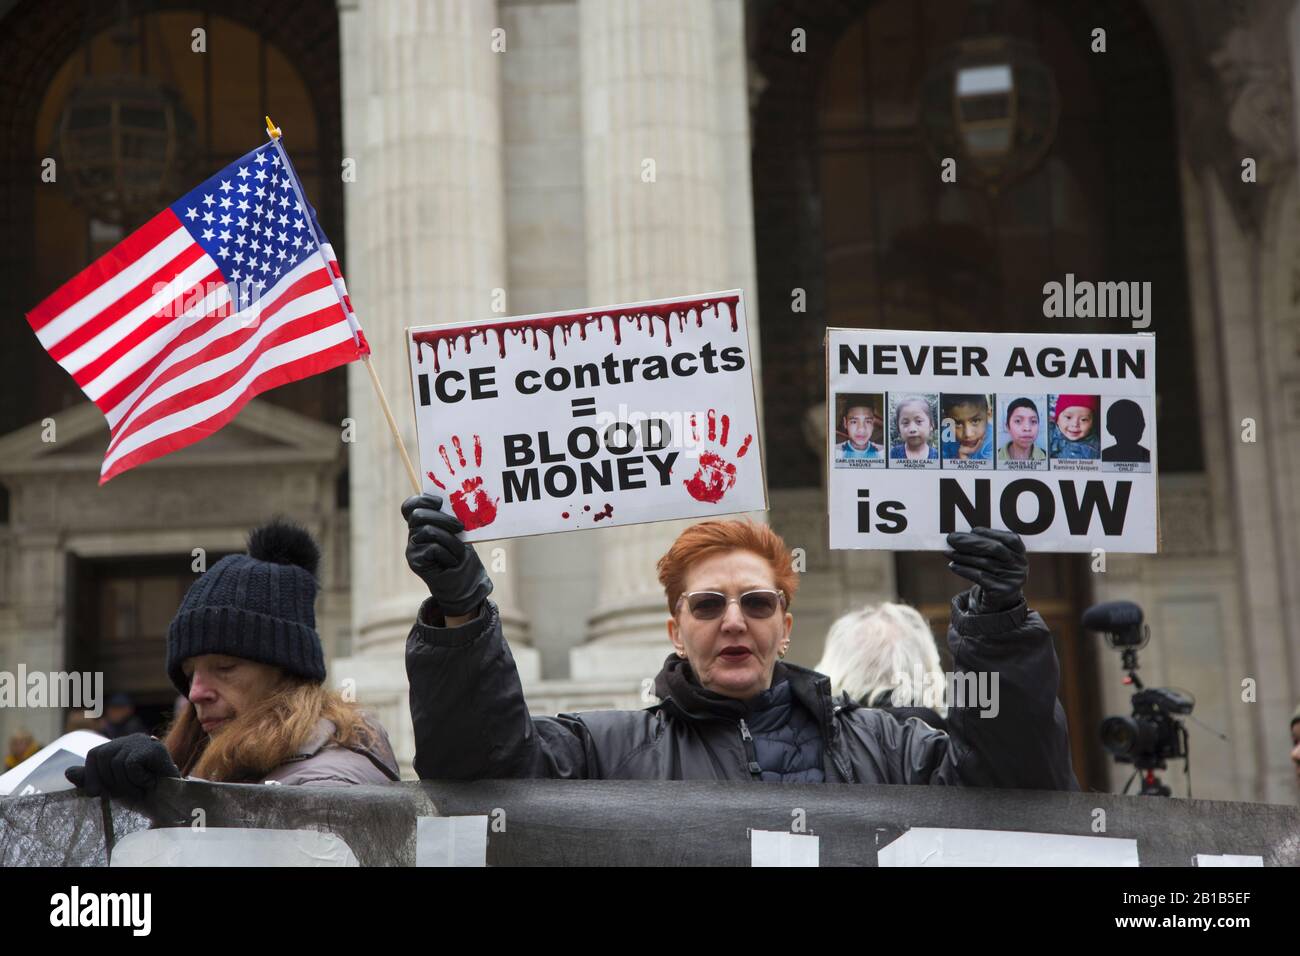 Protesters against the tactics and actions of ICE,(Immigration and Customs Enforcement) demonstrate and march from the steps of the New York Public Library on 5th Avenue in Manhattan, New York City which is declared to be a Sanctuary City. Stock Photo